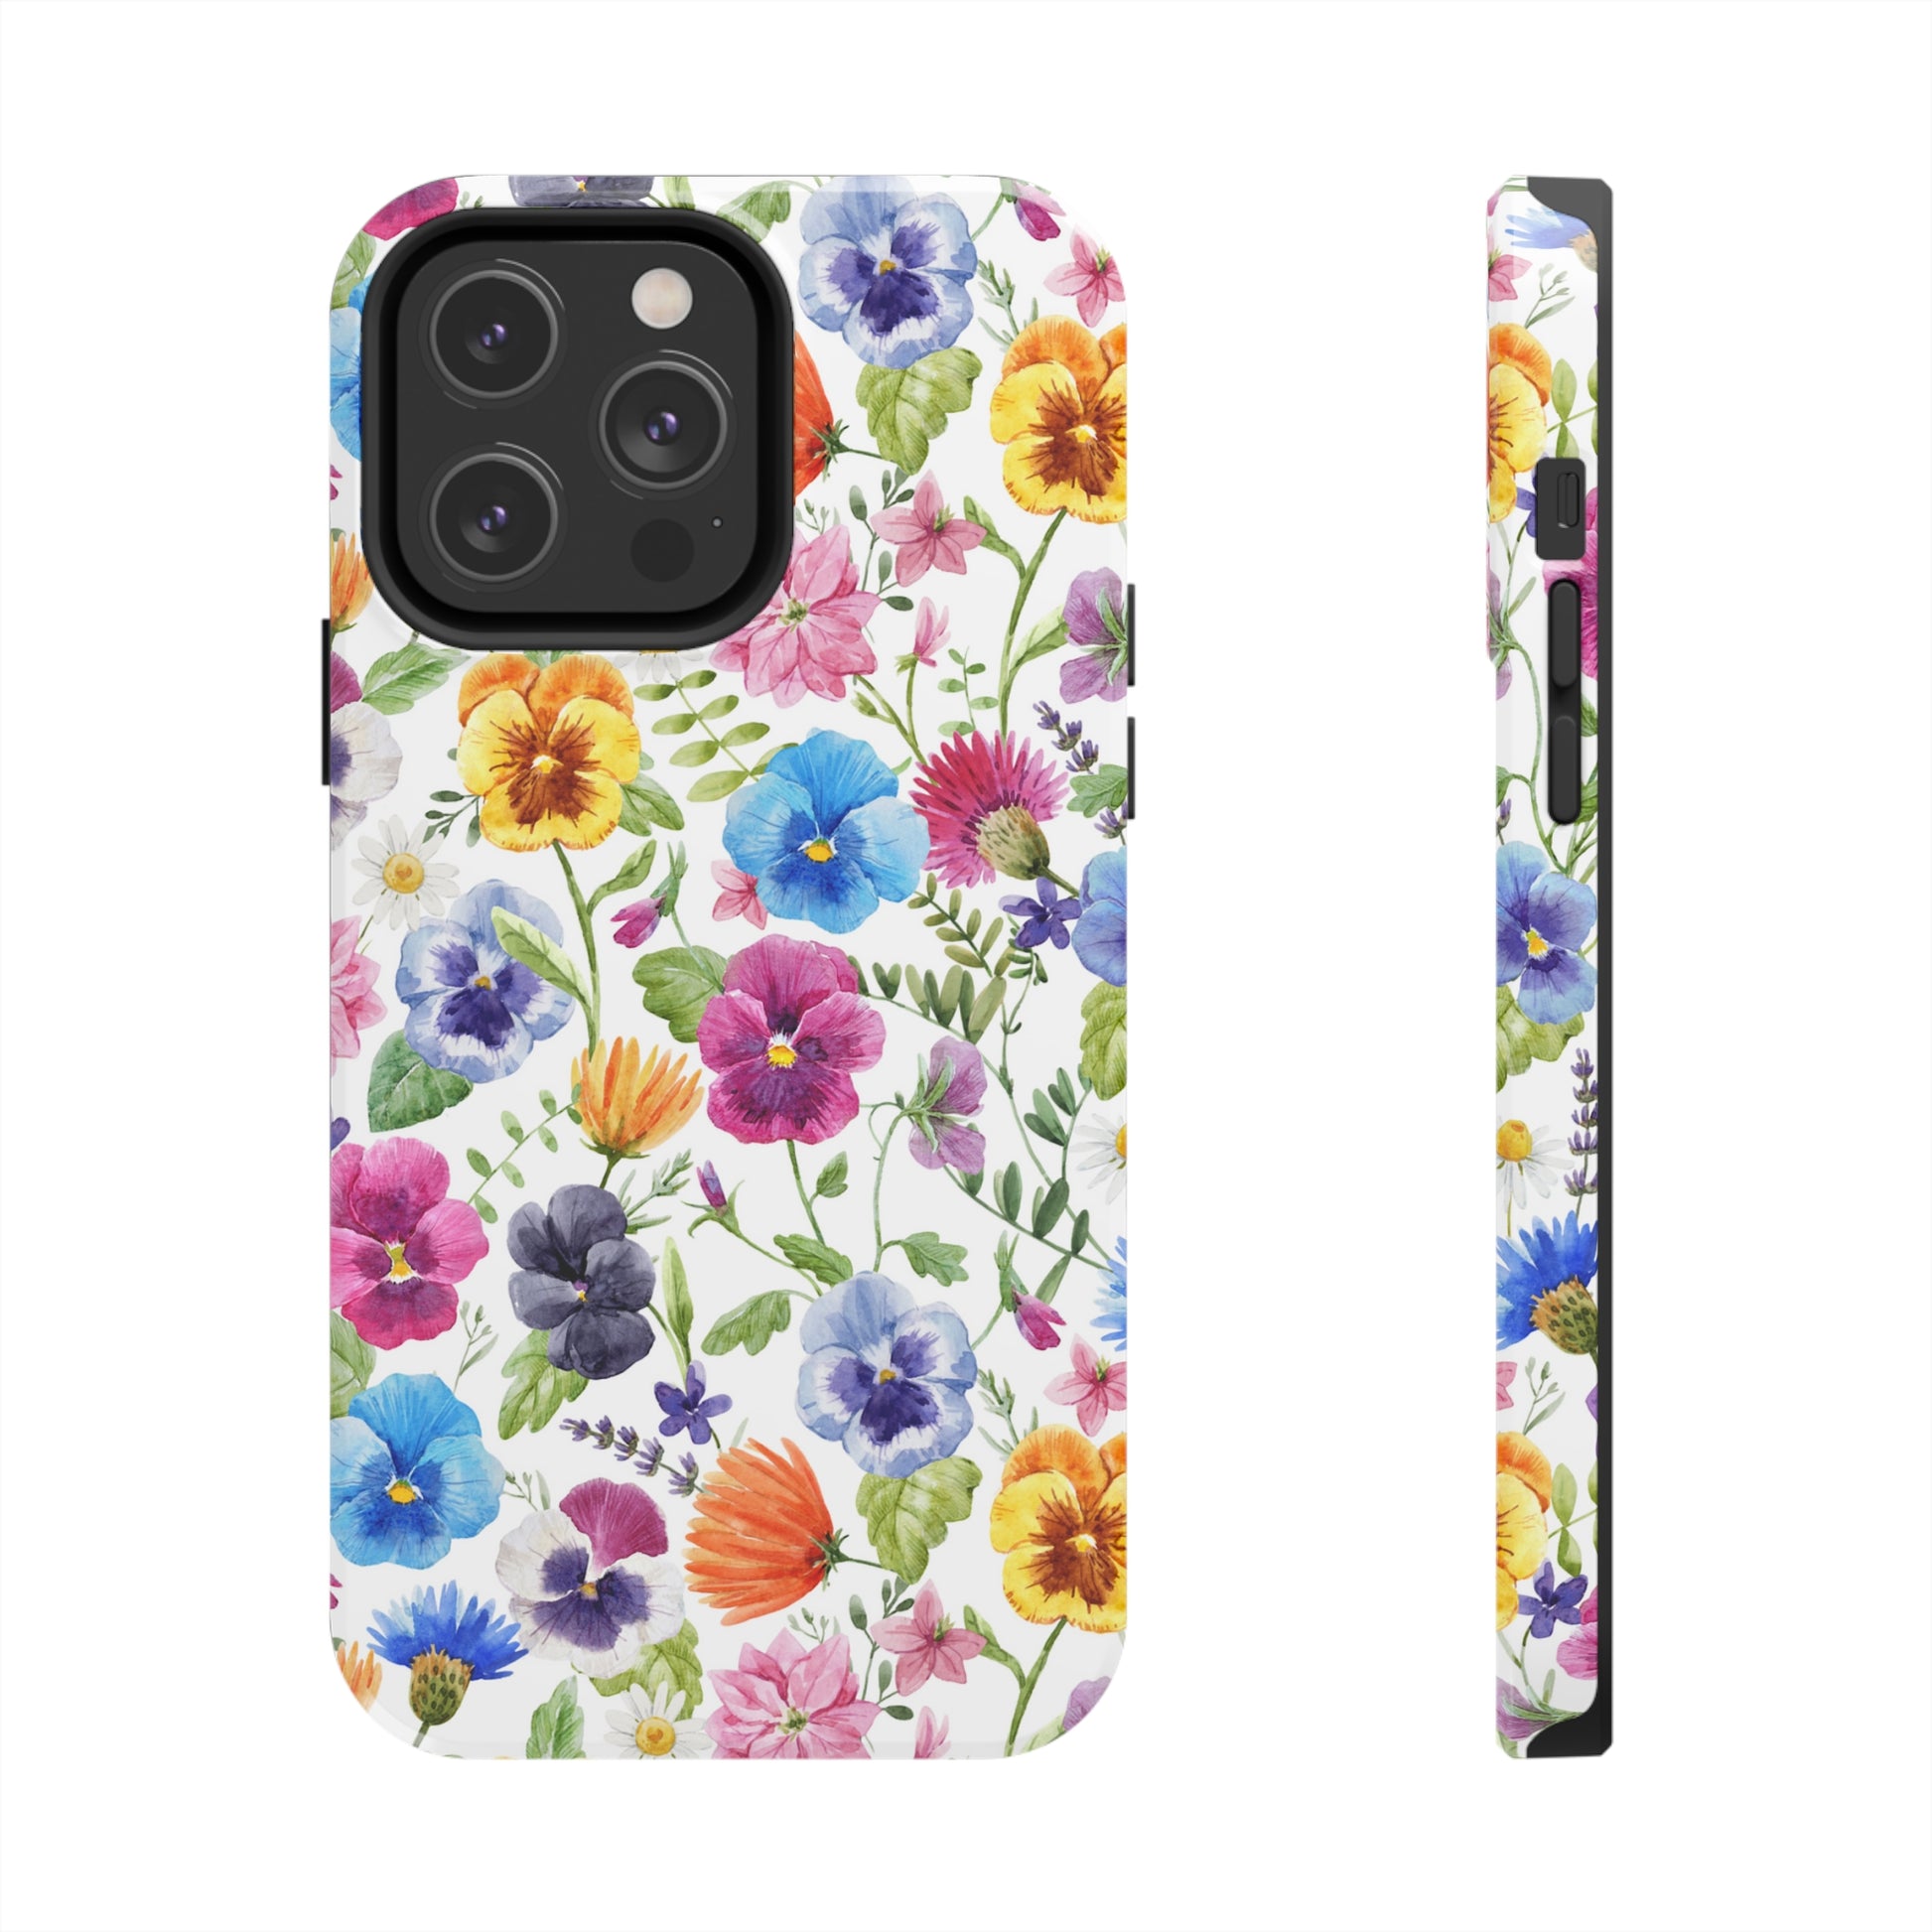 pansy flower iphone case with blue, yellow, pink, purple and green floral print